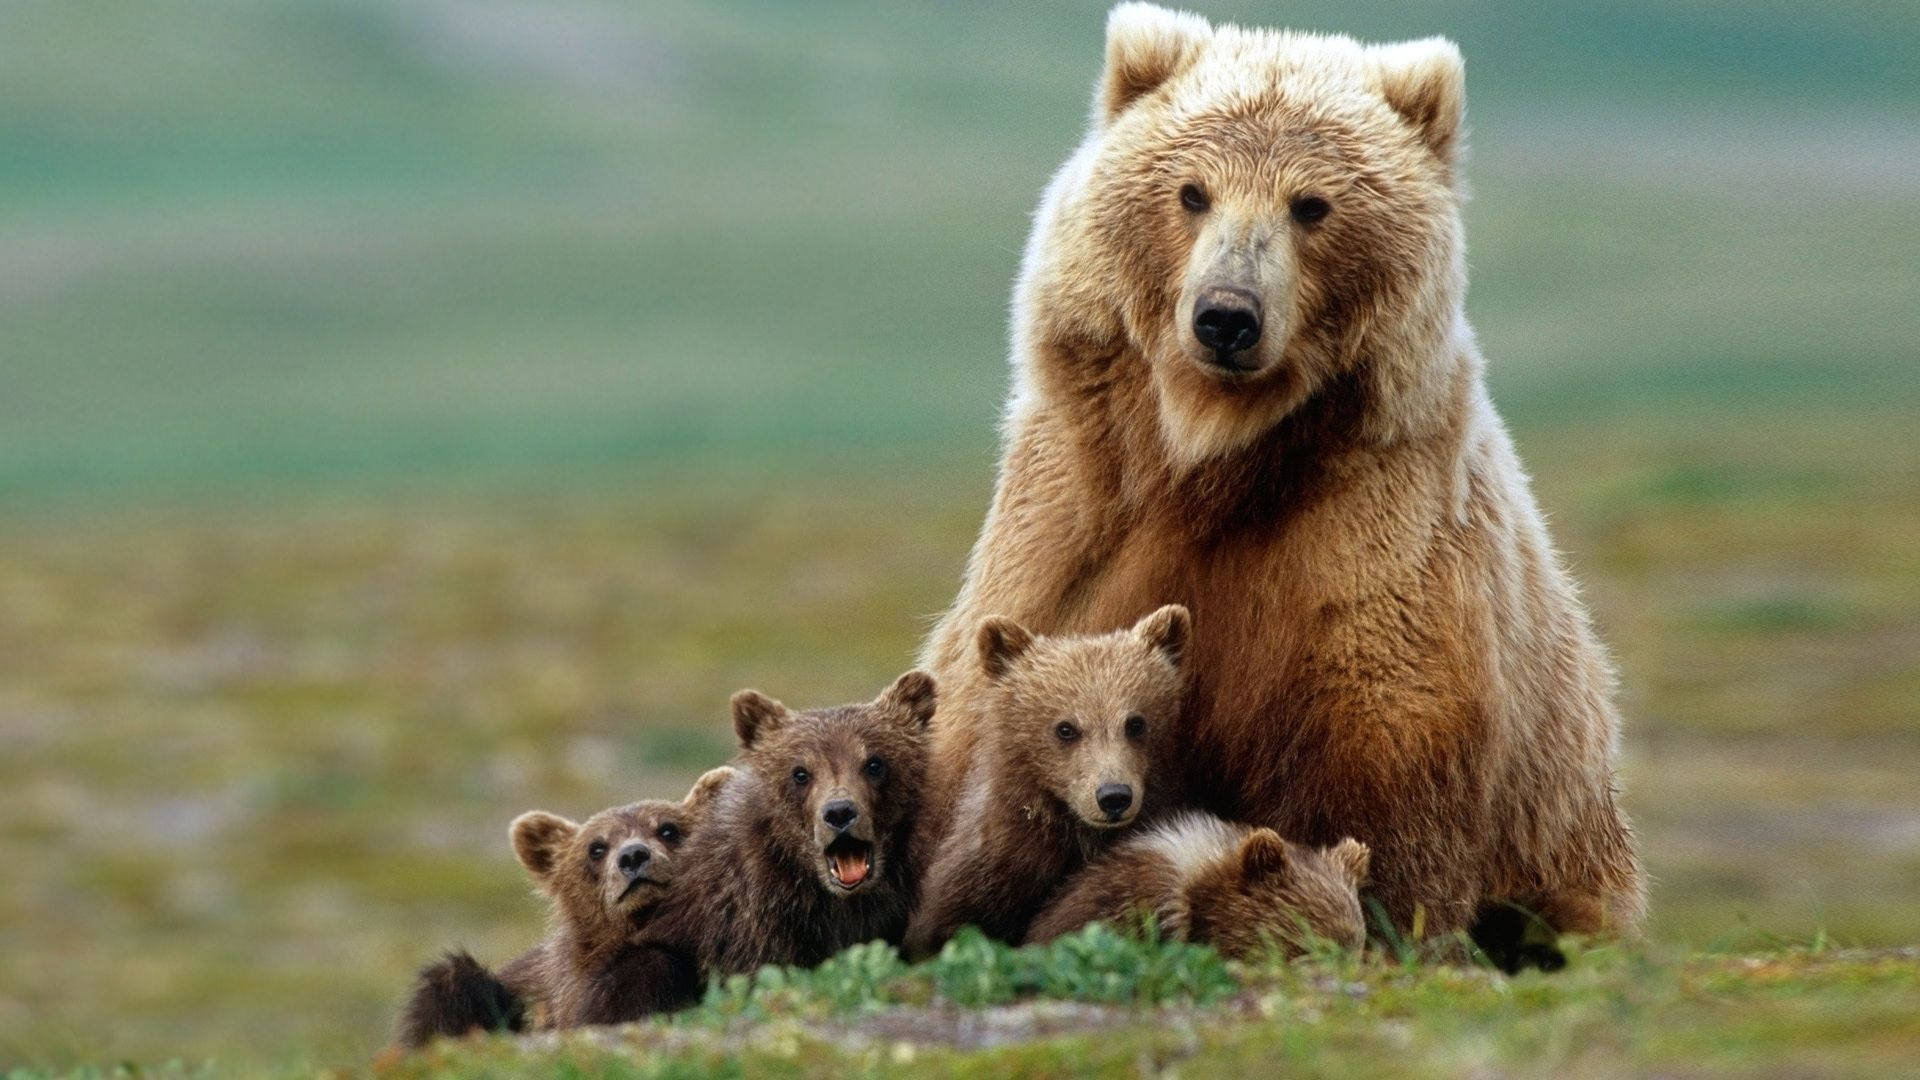 Brown Bear With Cubs On Green Grass Wallpaper